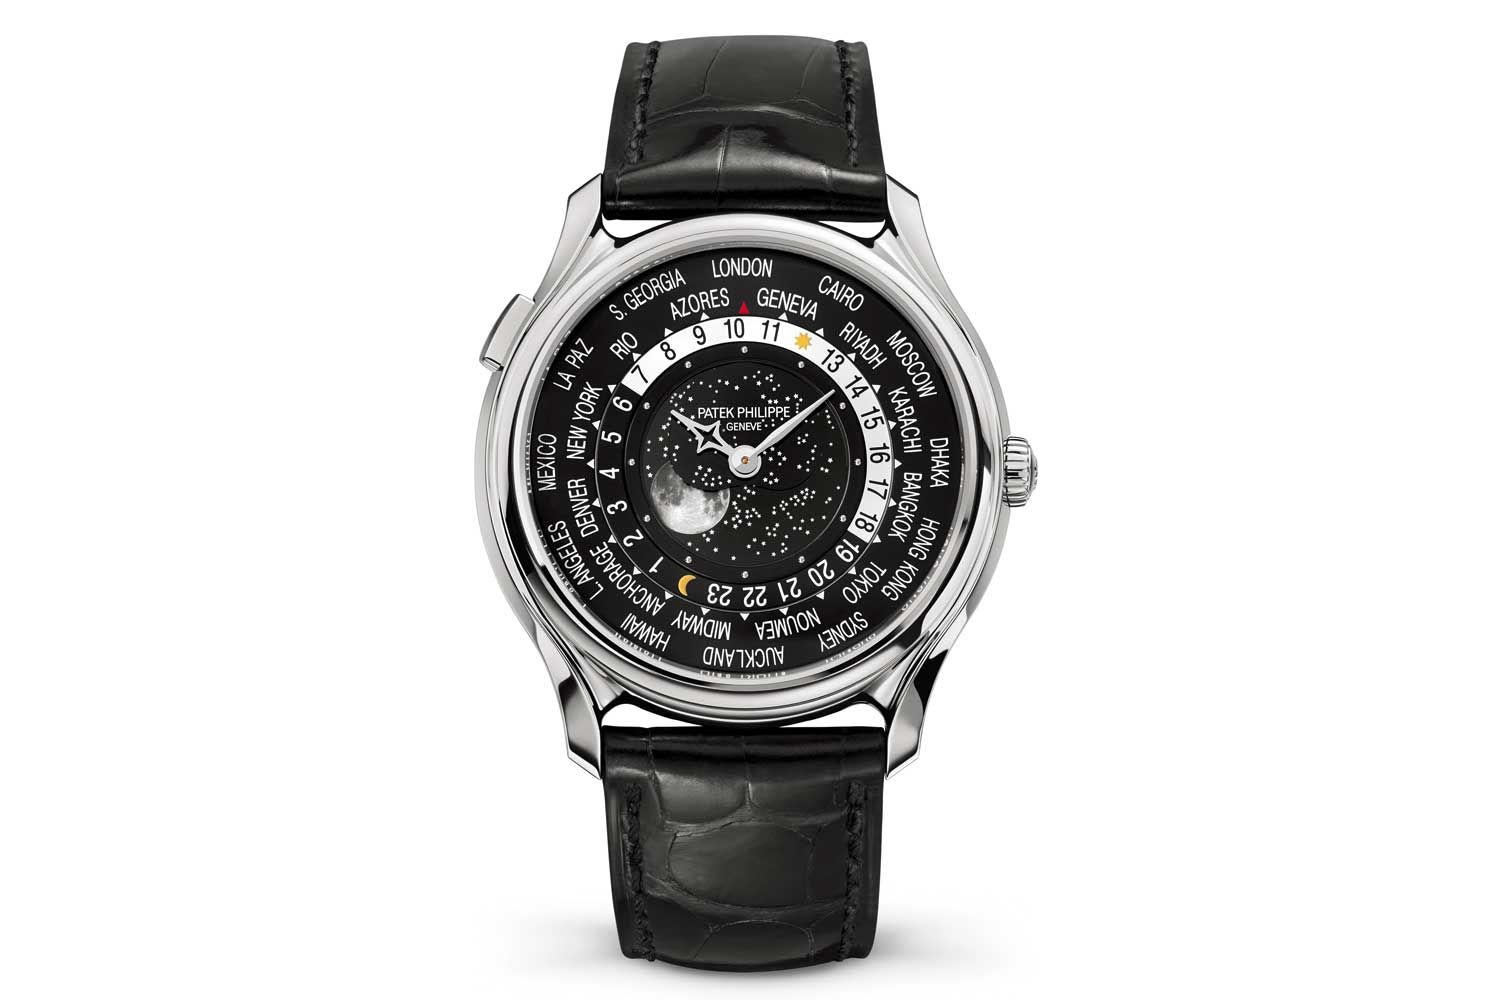 The ref. 5575 was also offered in a 39.8mm white gold case, limited to 1300 pieces.